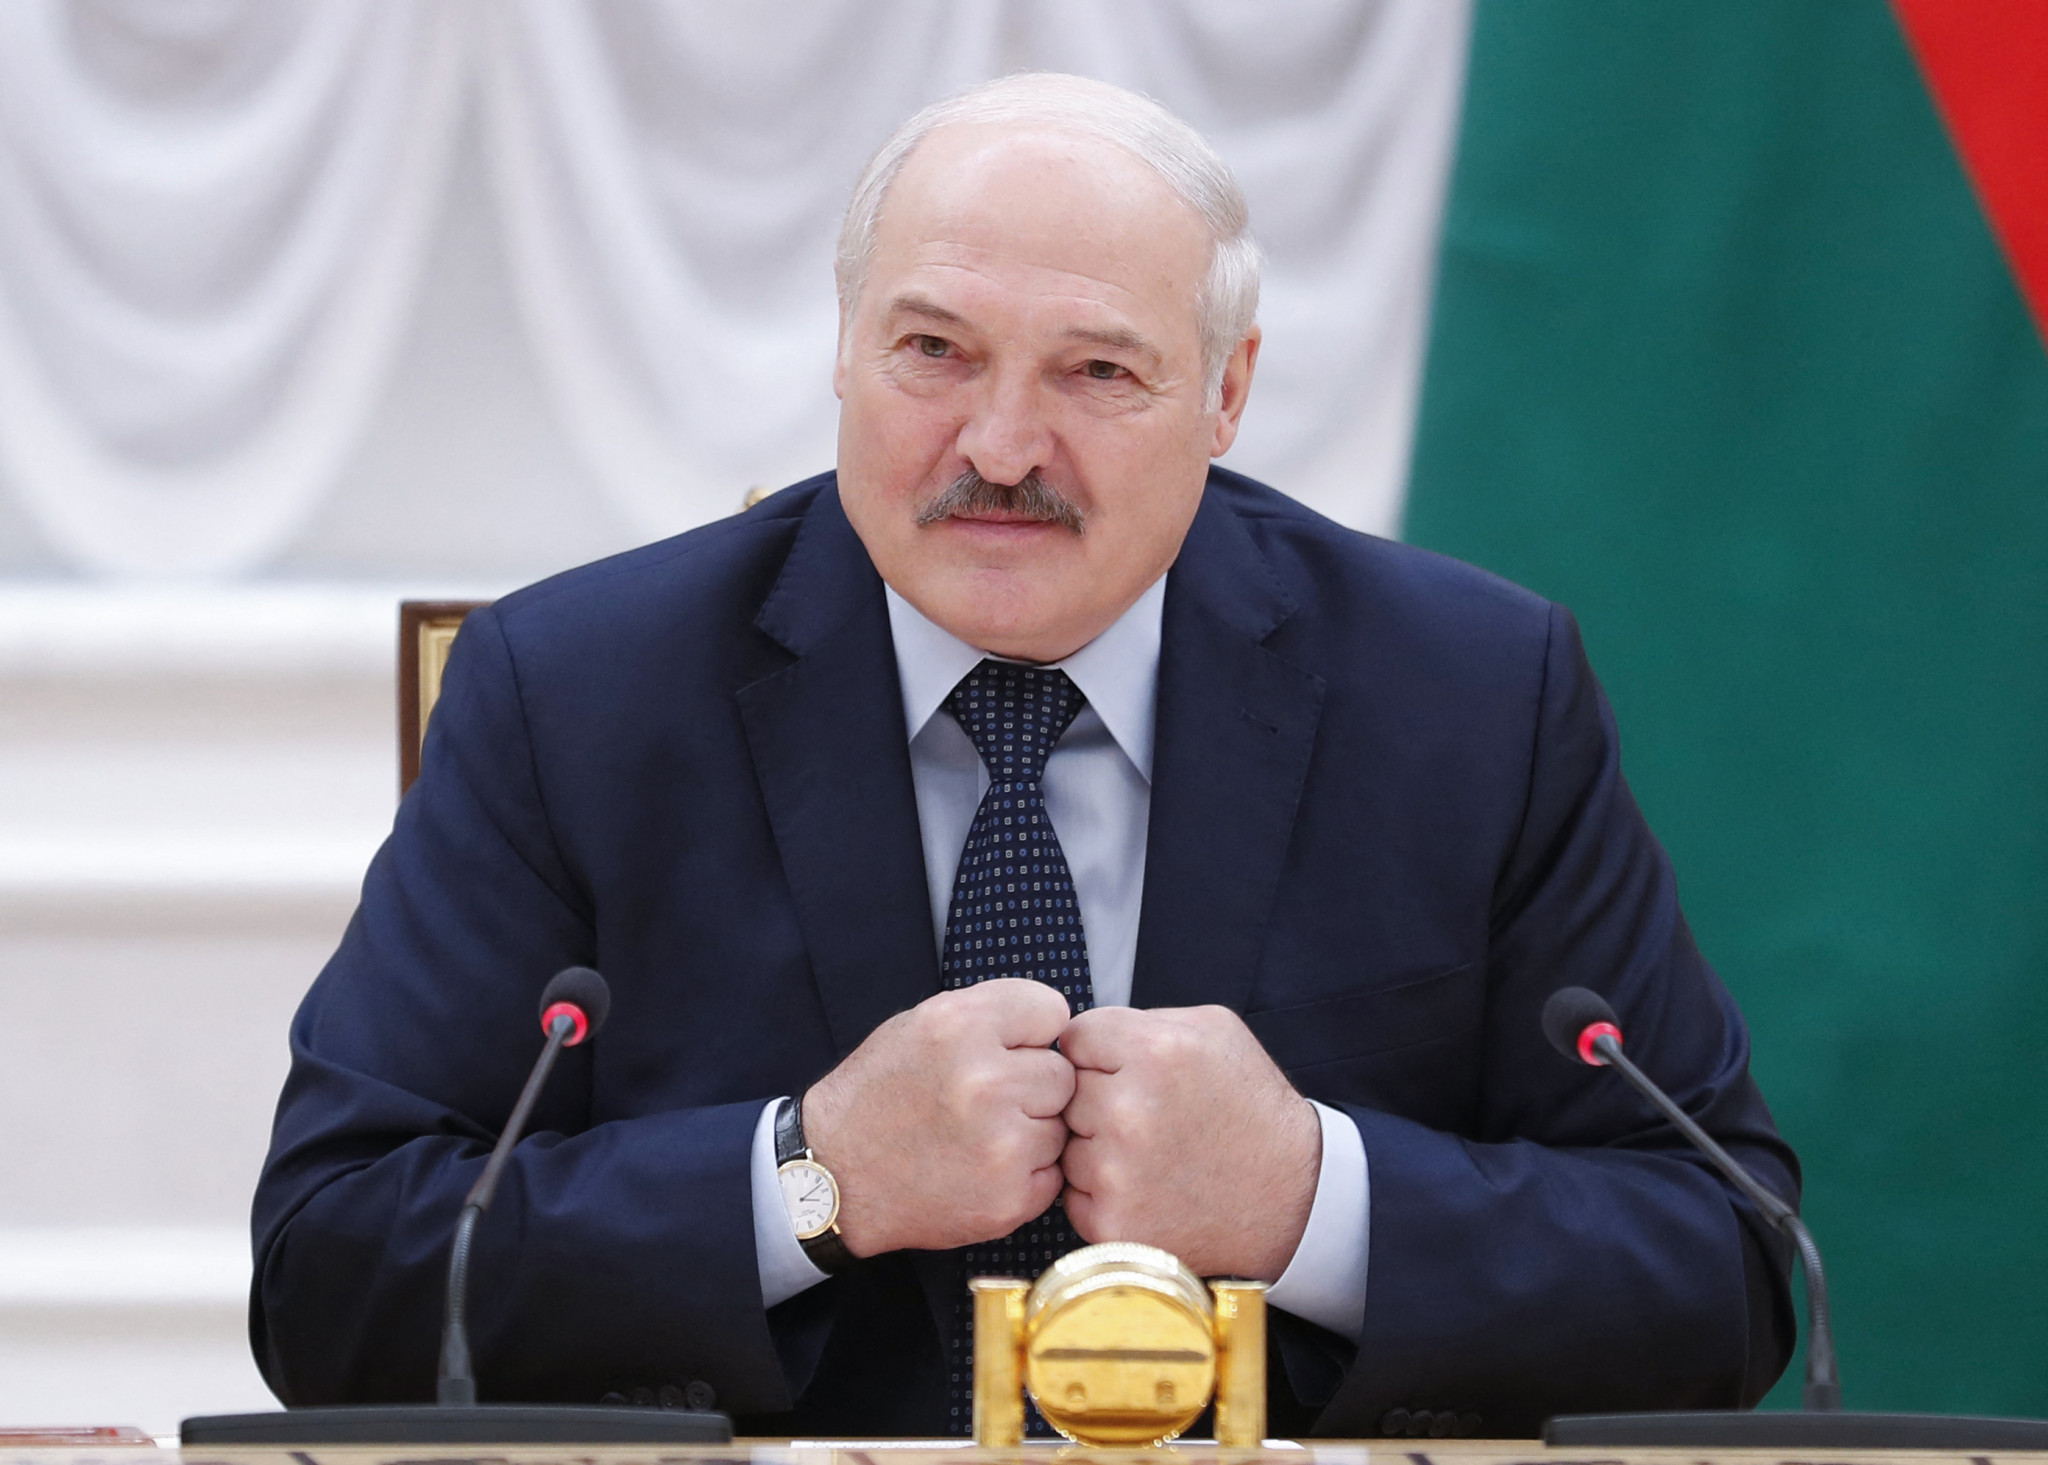 Belarus was stripped of hosting a World Cup event after protests erupted against President Alexander Lukashenko ©Getty Images